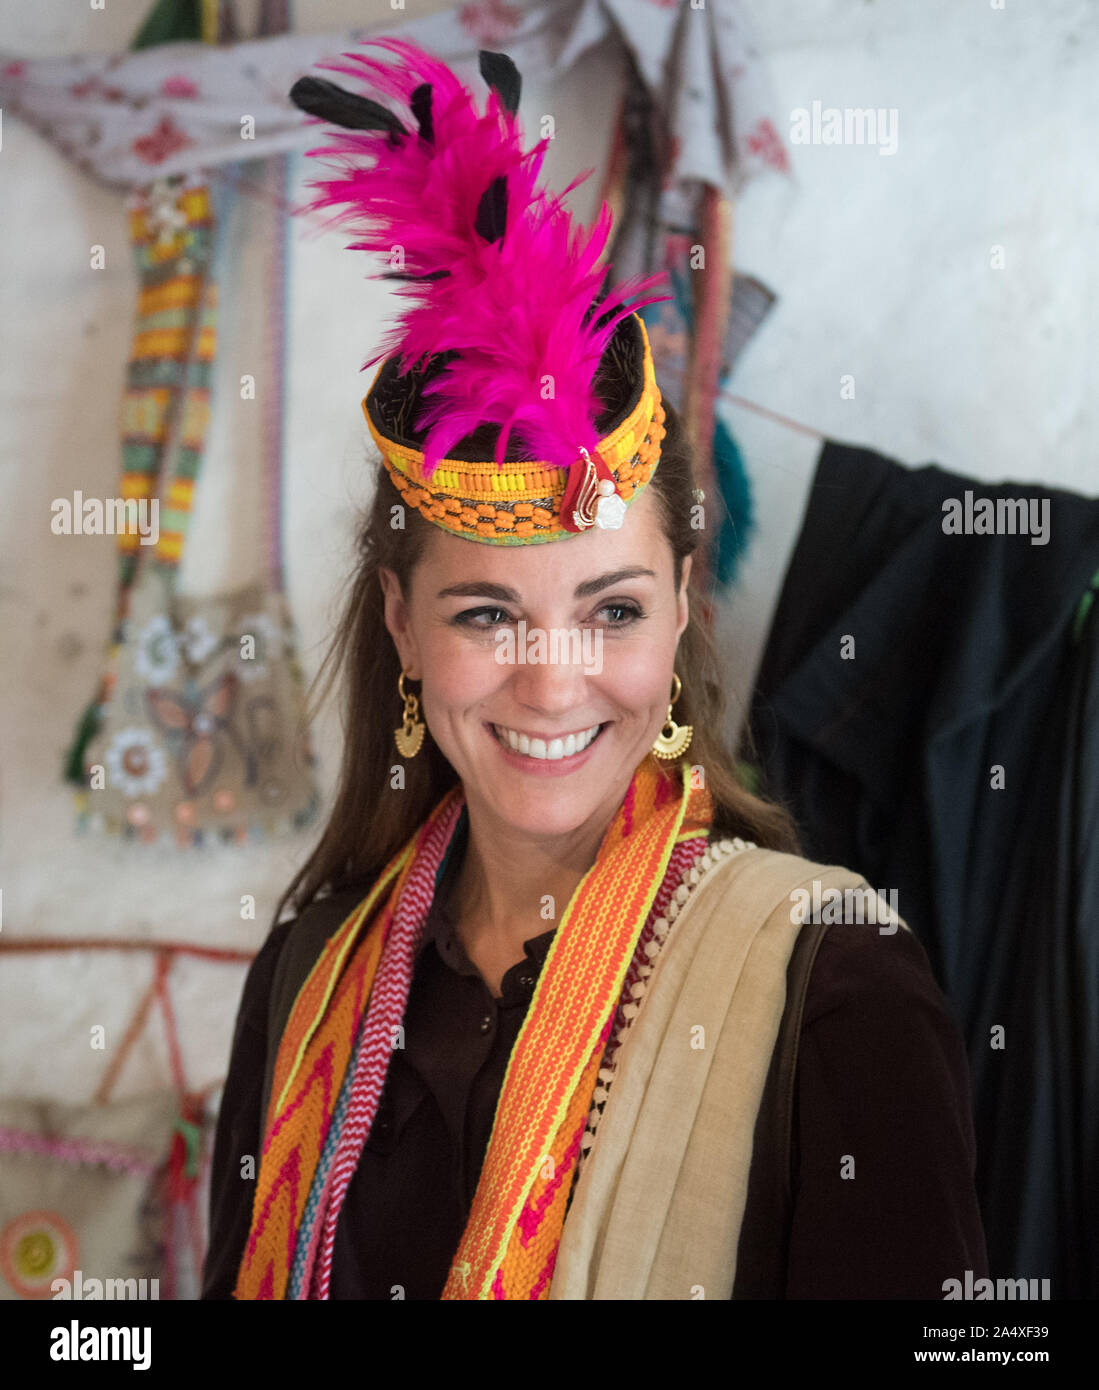 The Duchess Of Cambridge During A Visit To A Settlement Of The Kalash People In Chitral Pakistan On The Third Day Of The Royal Visit To The Country Stock Photo Alamy